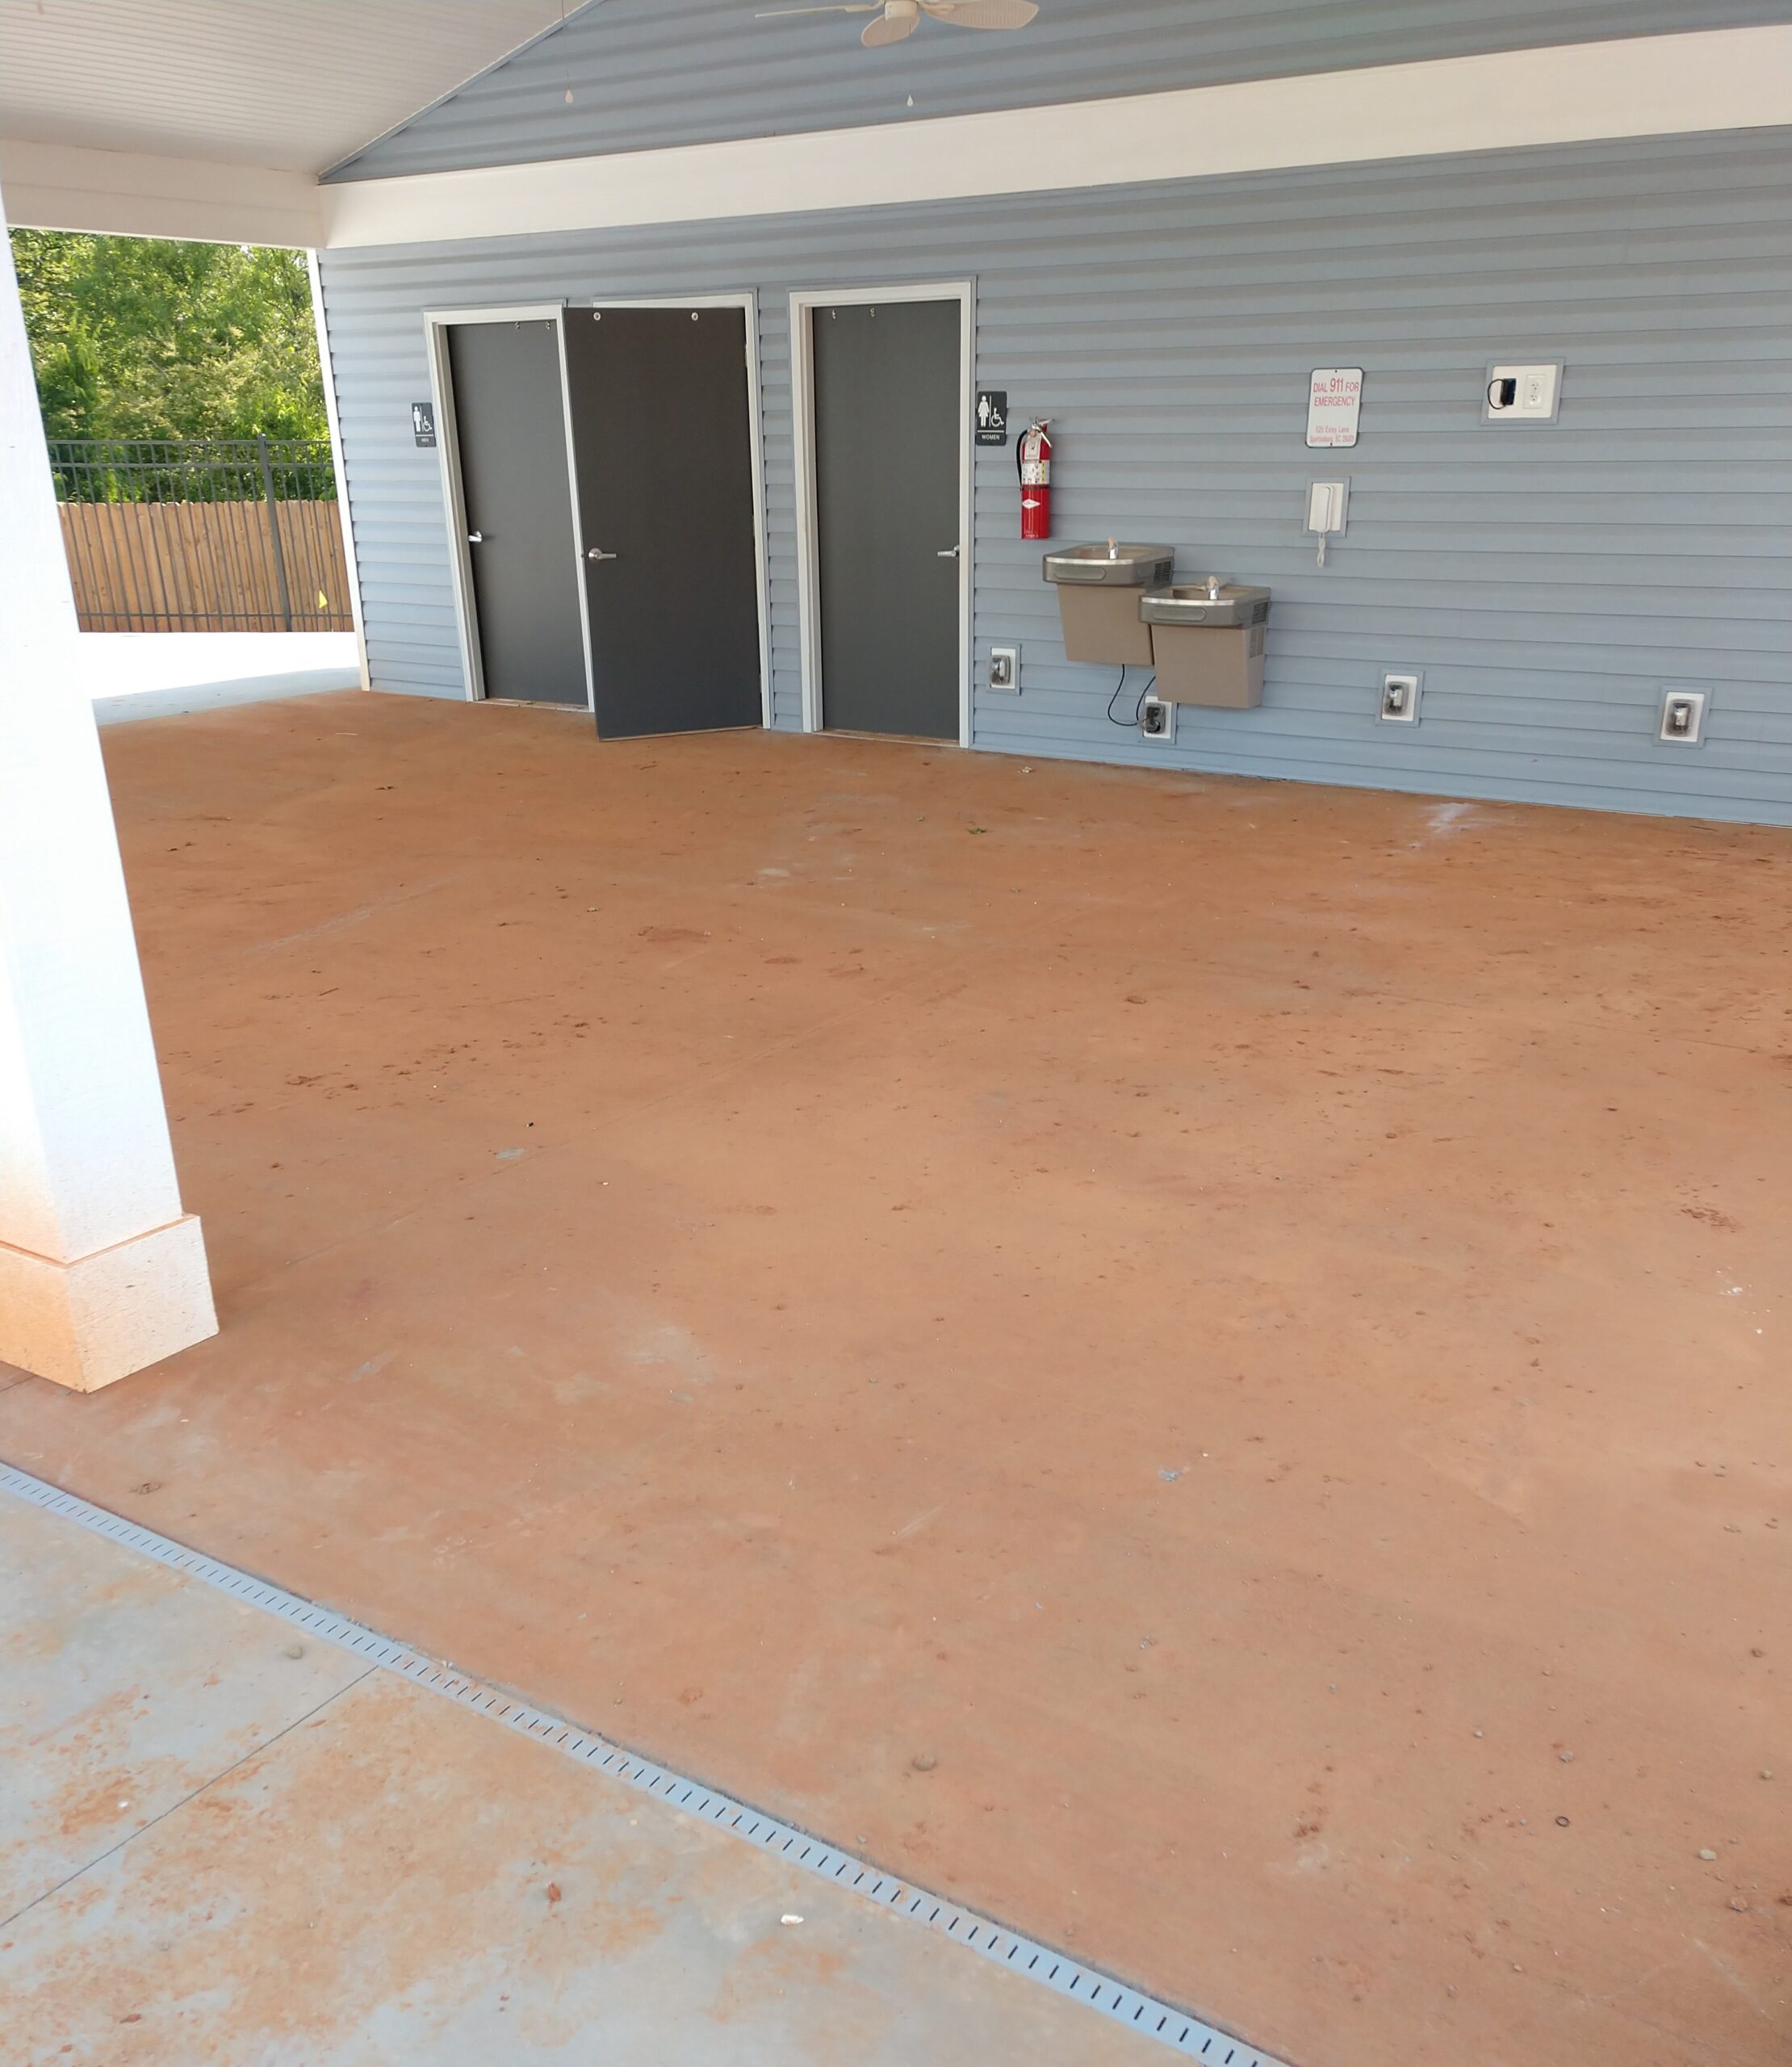 Pool-deck-red-clay-before-pressure-washing